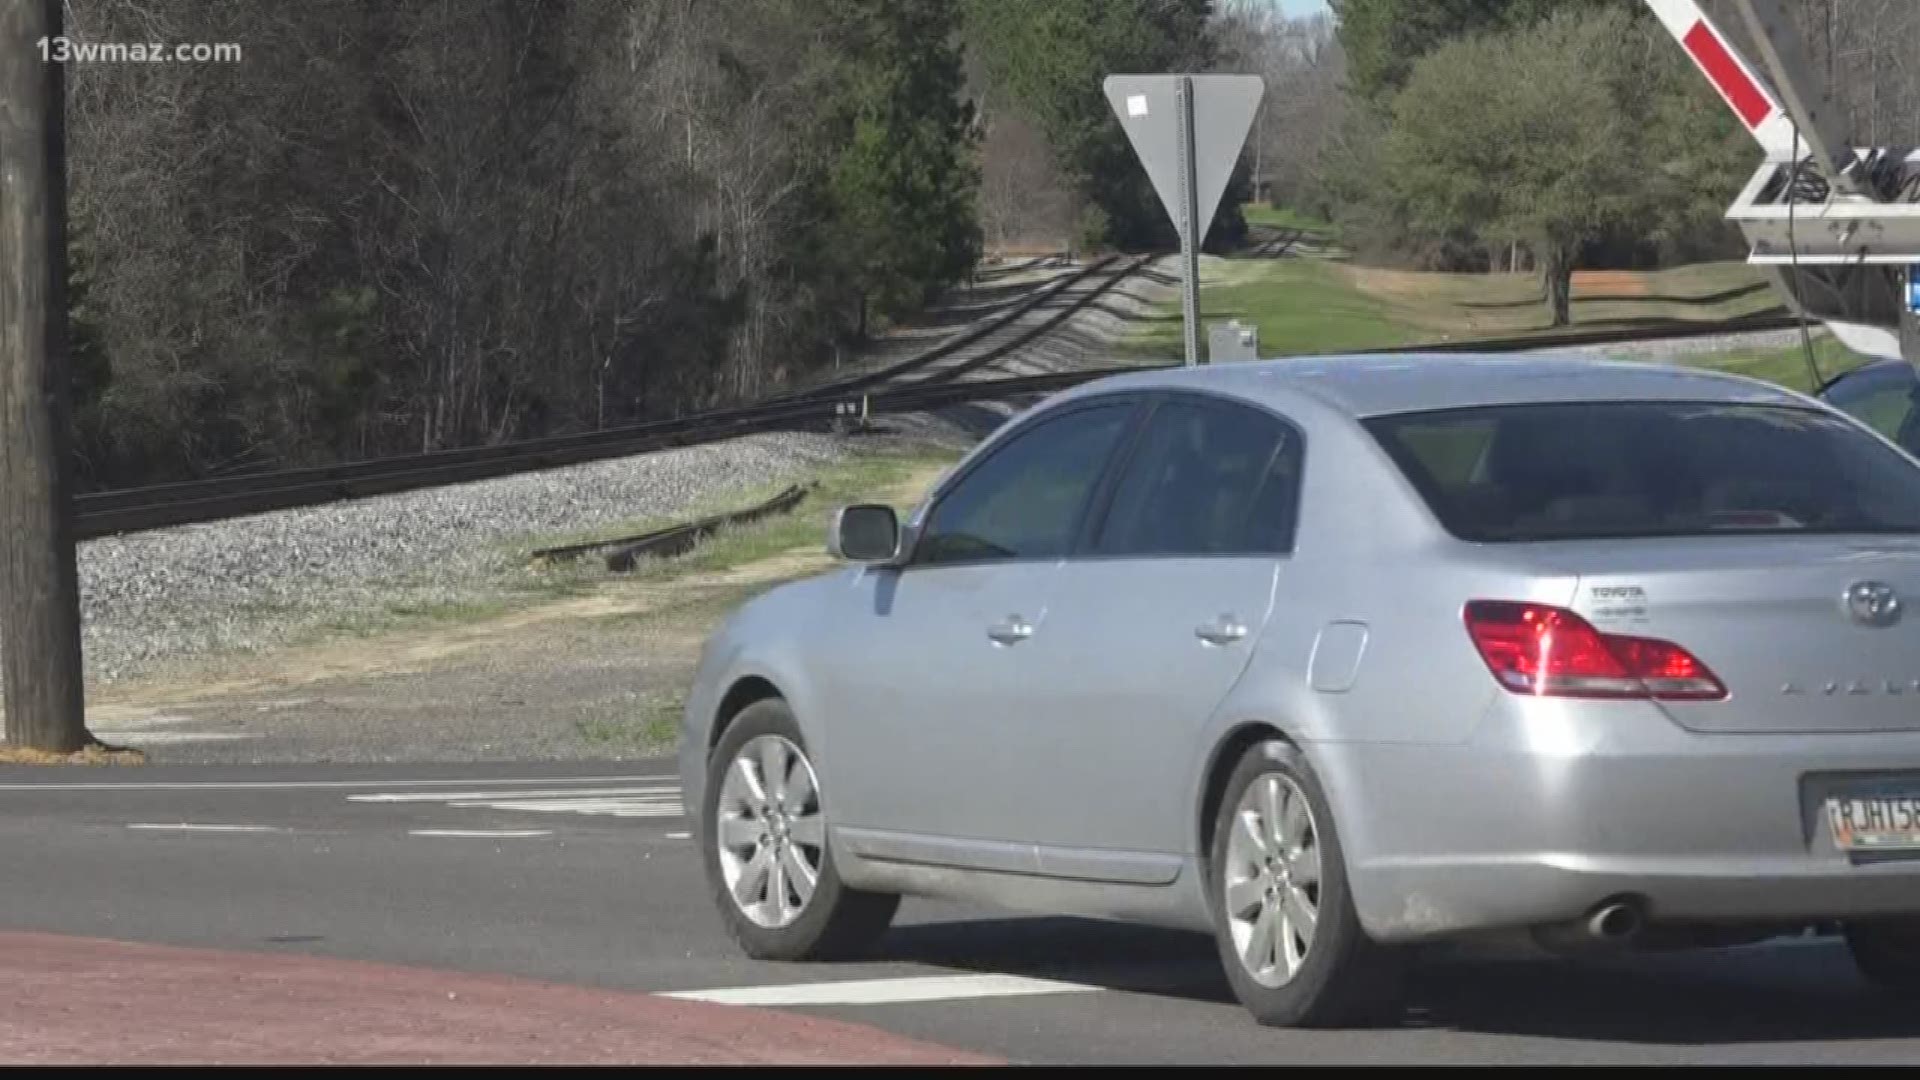 How are people adjusting to the new roundabout located on Georgia Highway 242 and Hospital Road in Sandersville?